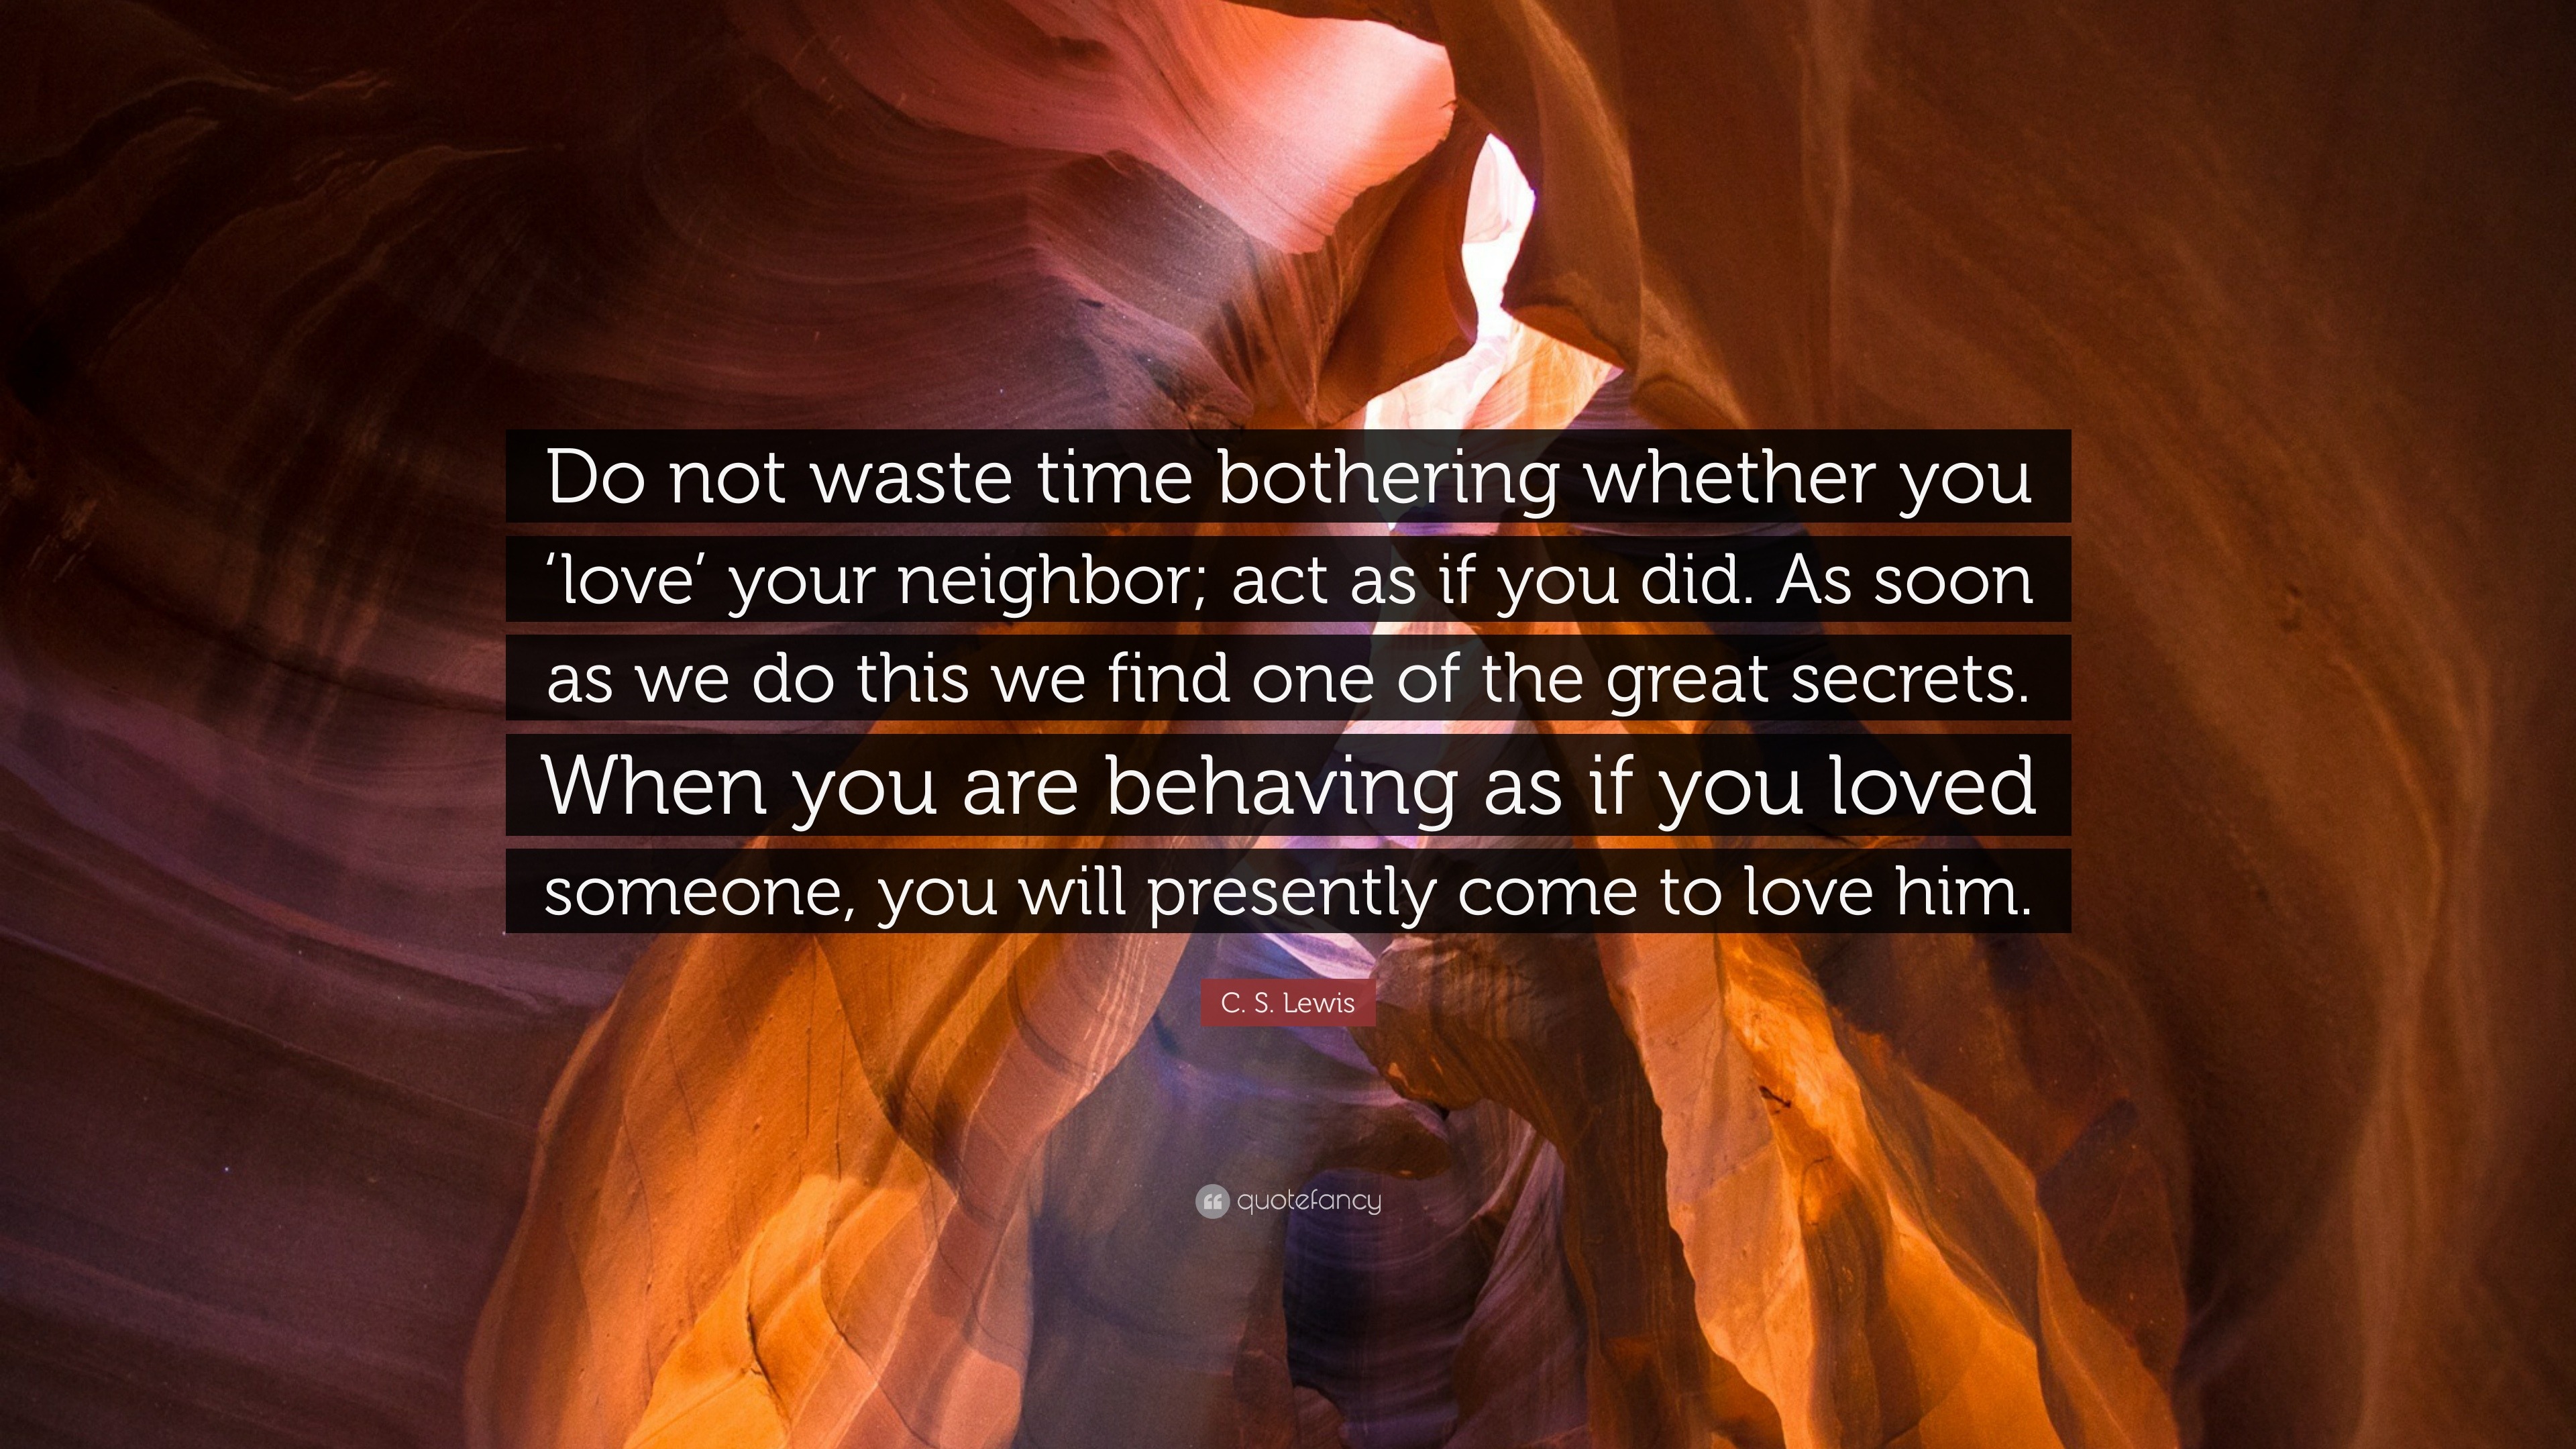 C S Lewis Quote “Do not waste time bothering whether you love your